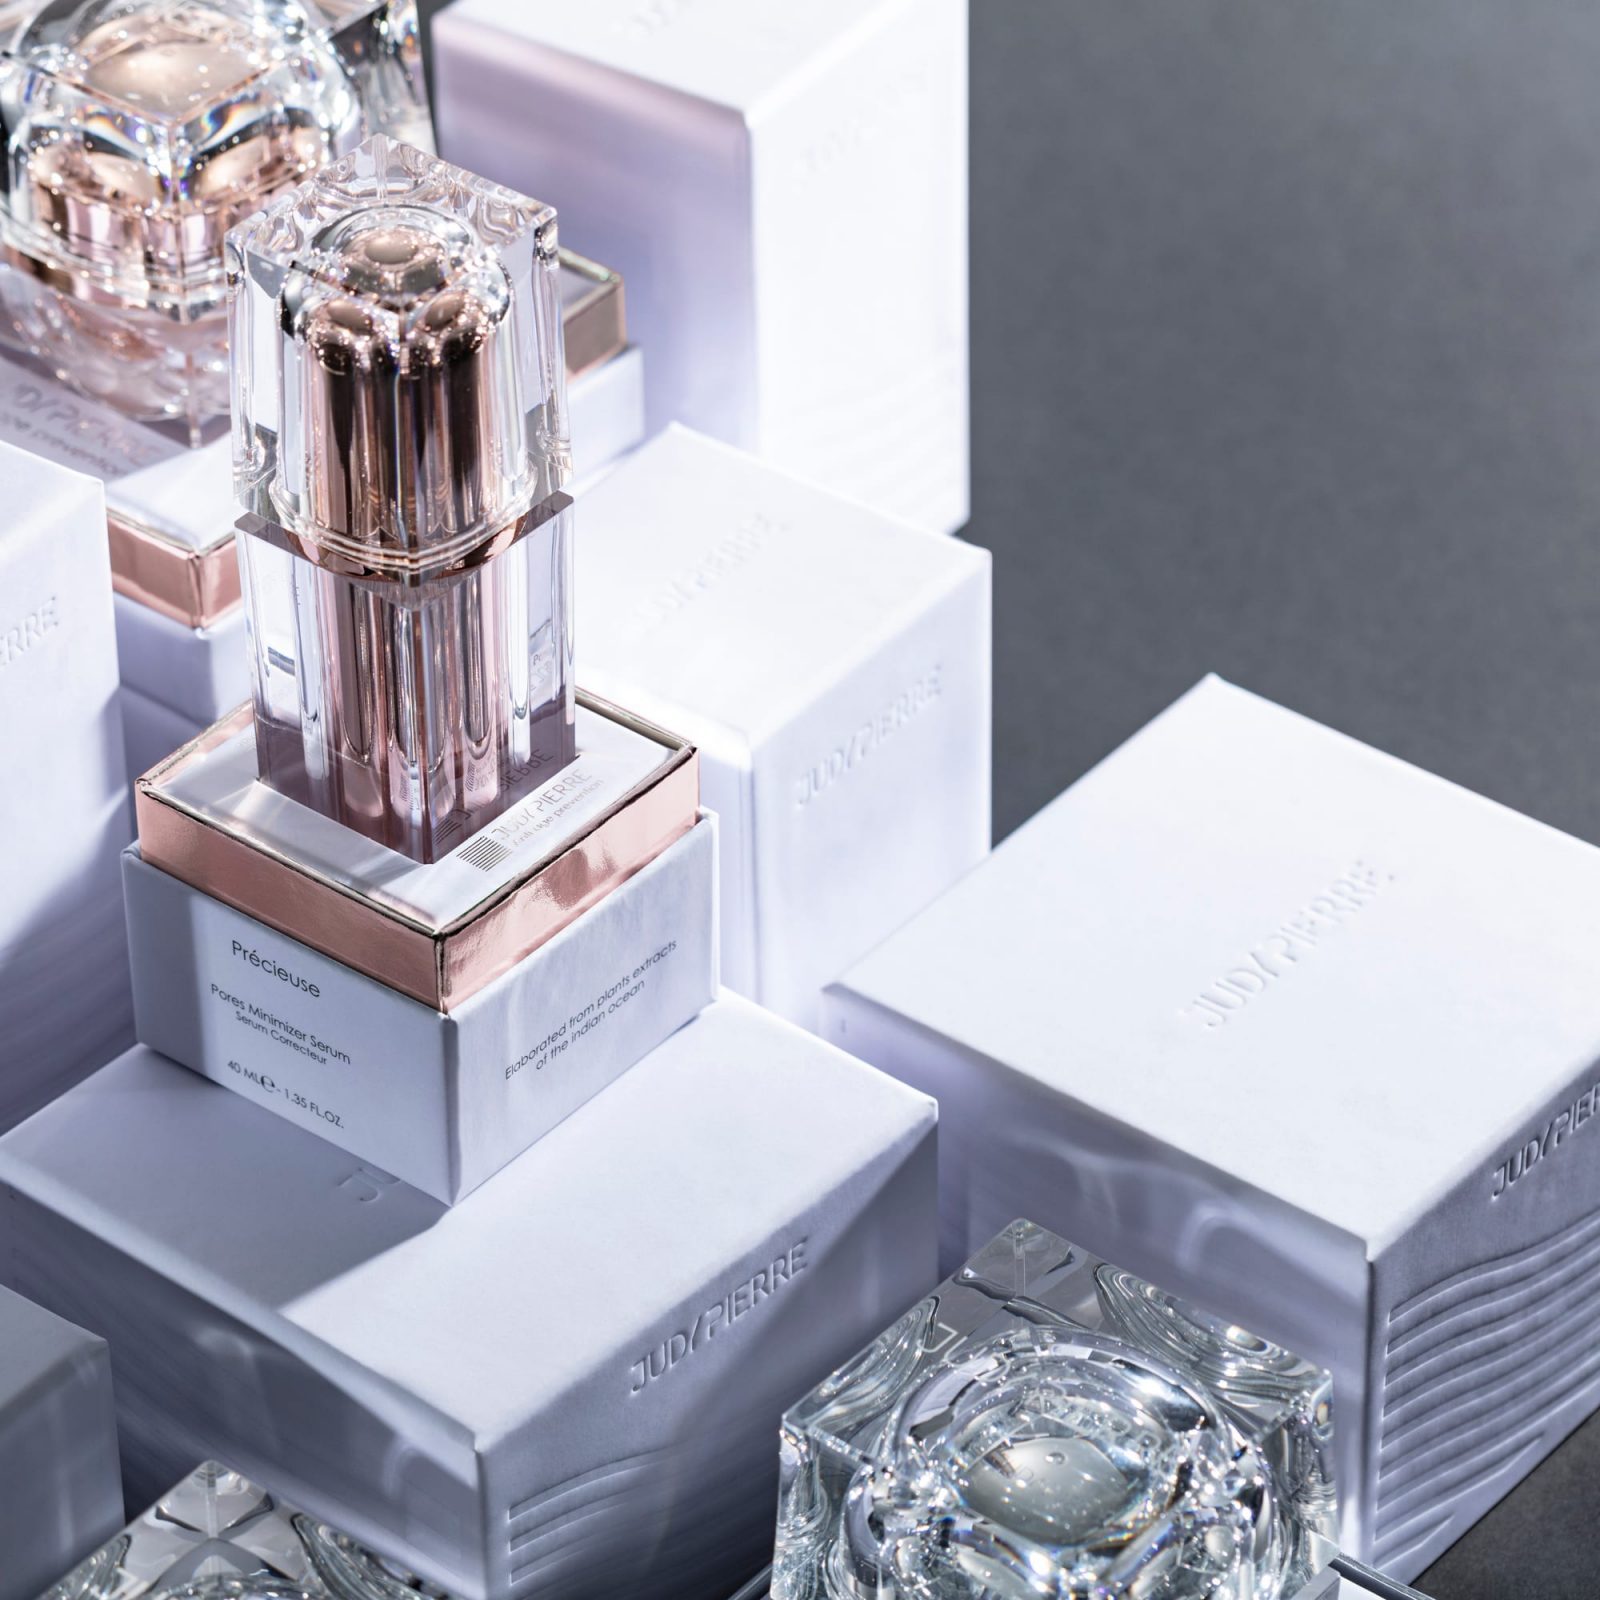 Product Identity and Packaging Design for Luxury Cosmetics